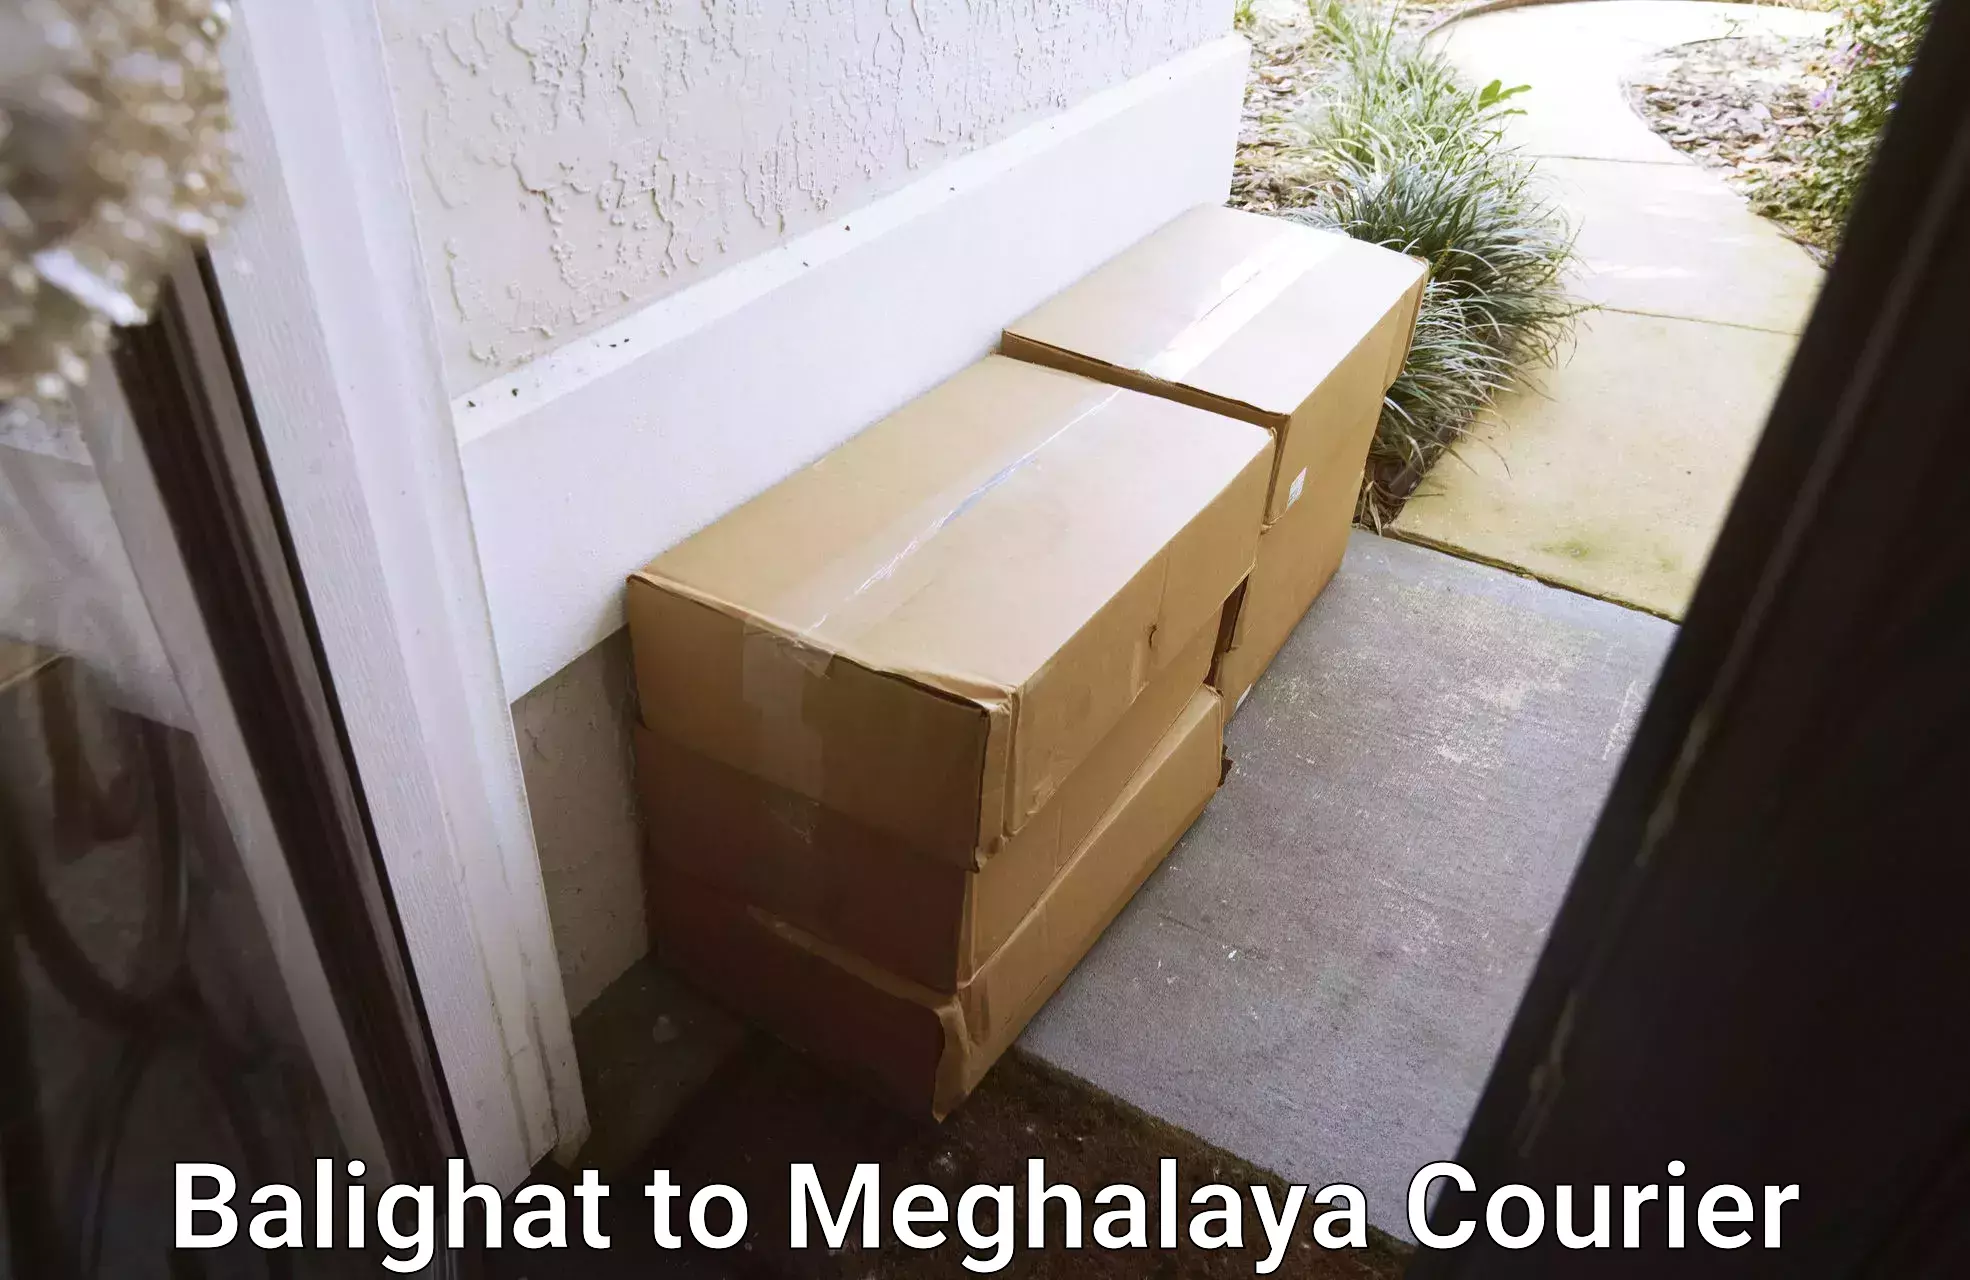 Supply chain delivery Balighat to Meghalaya